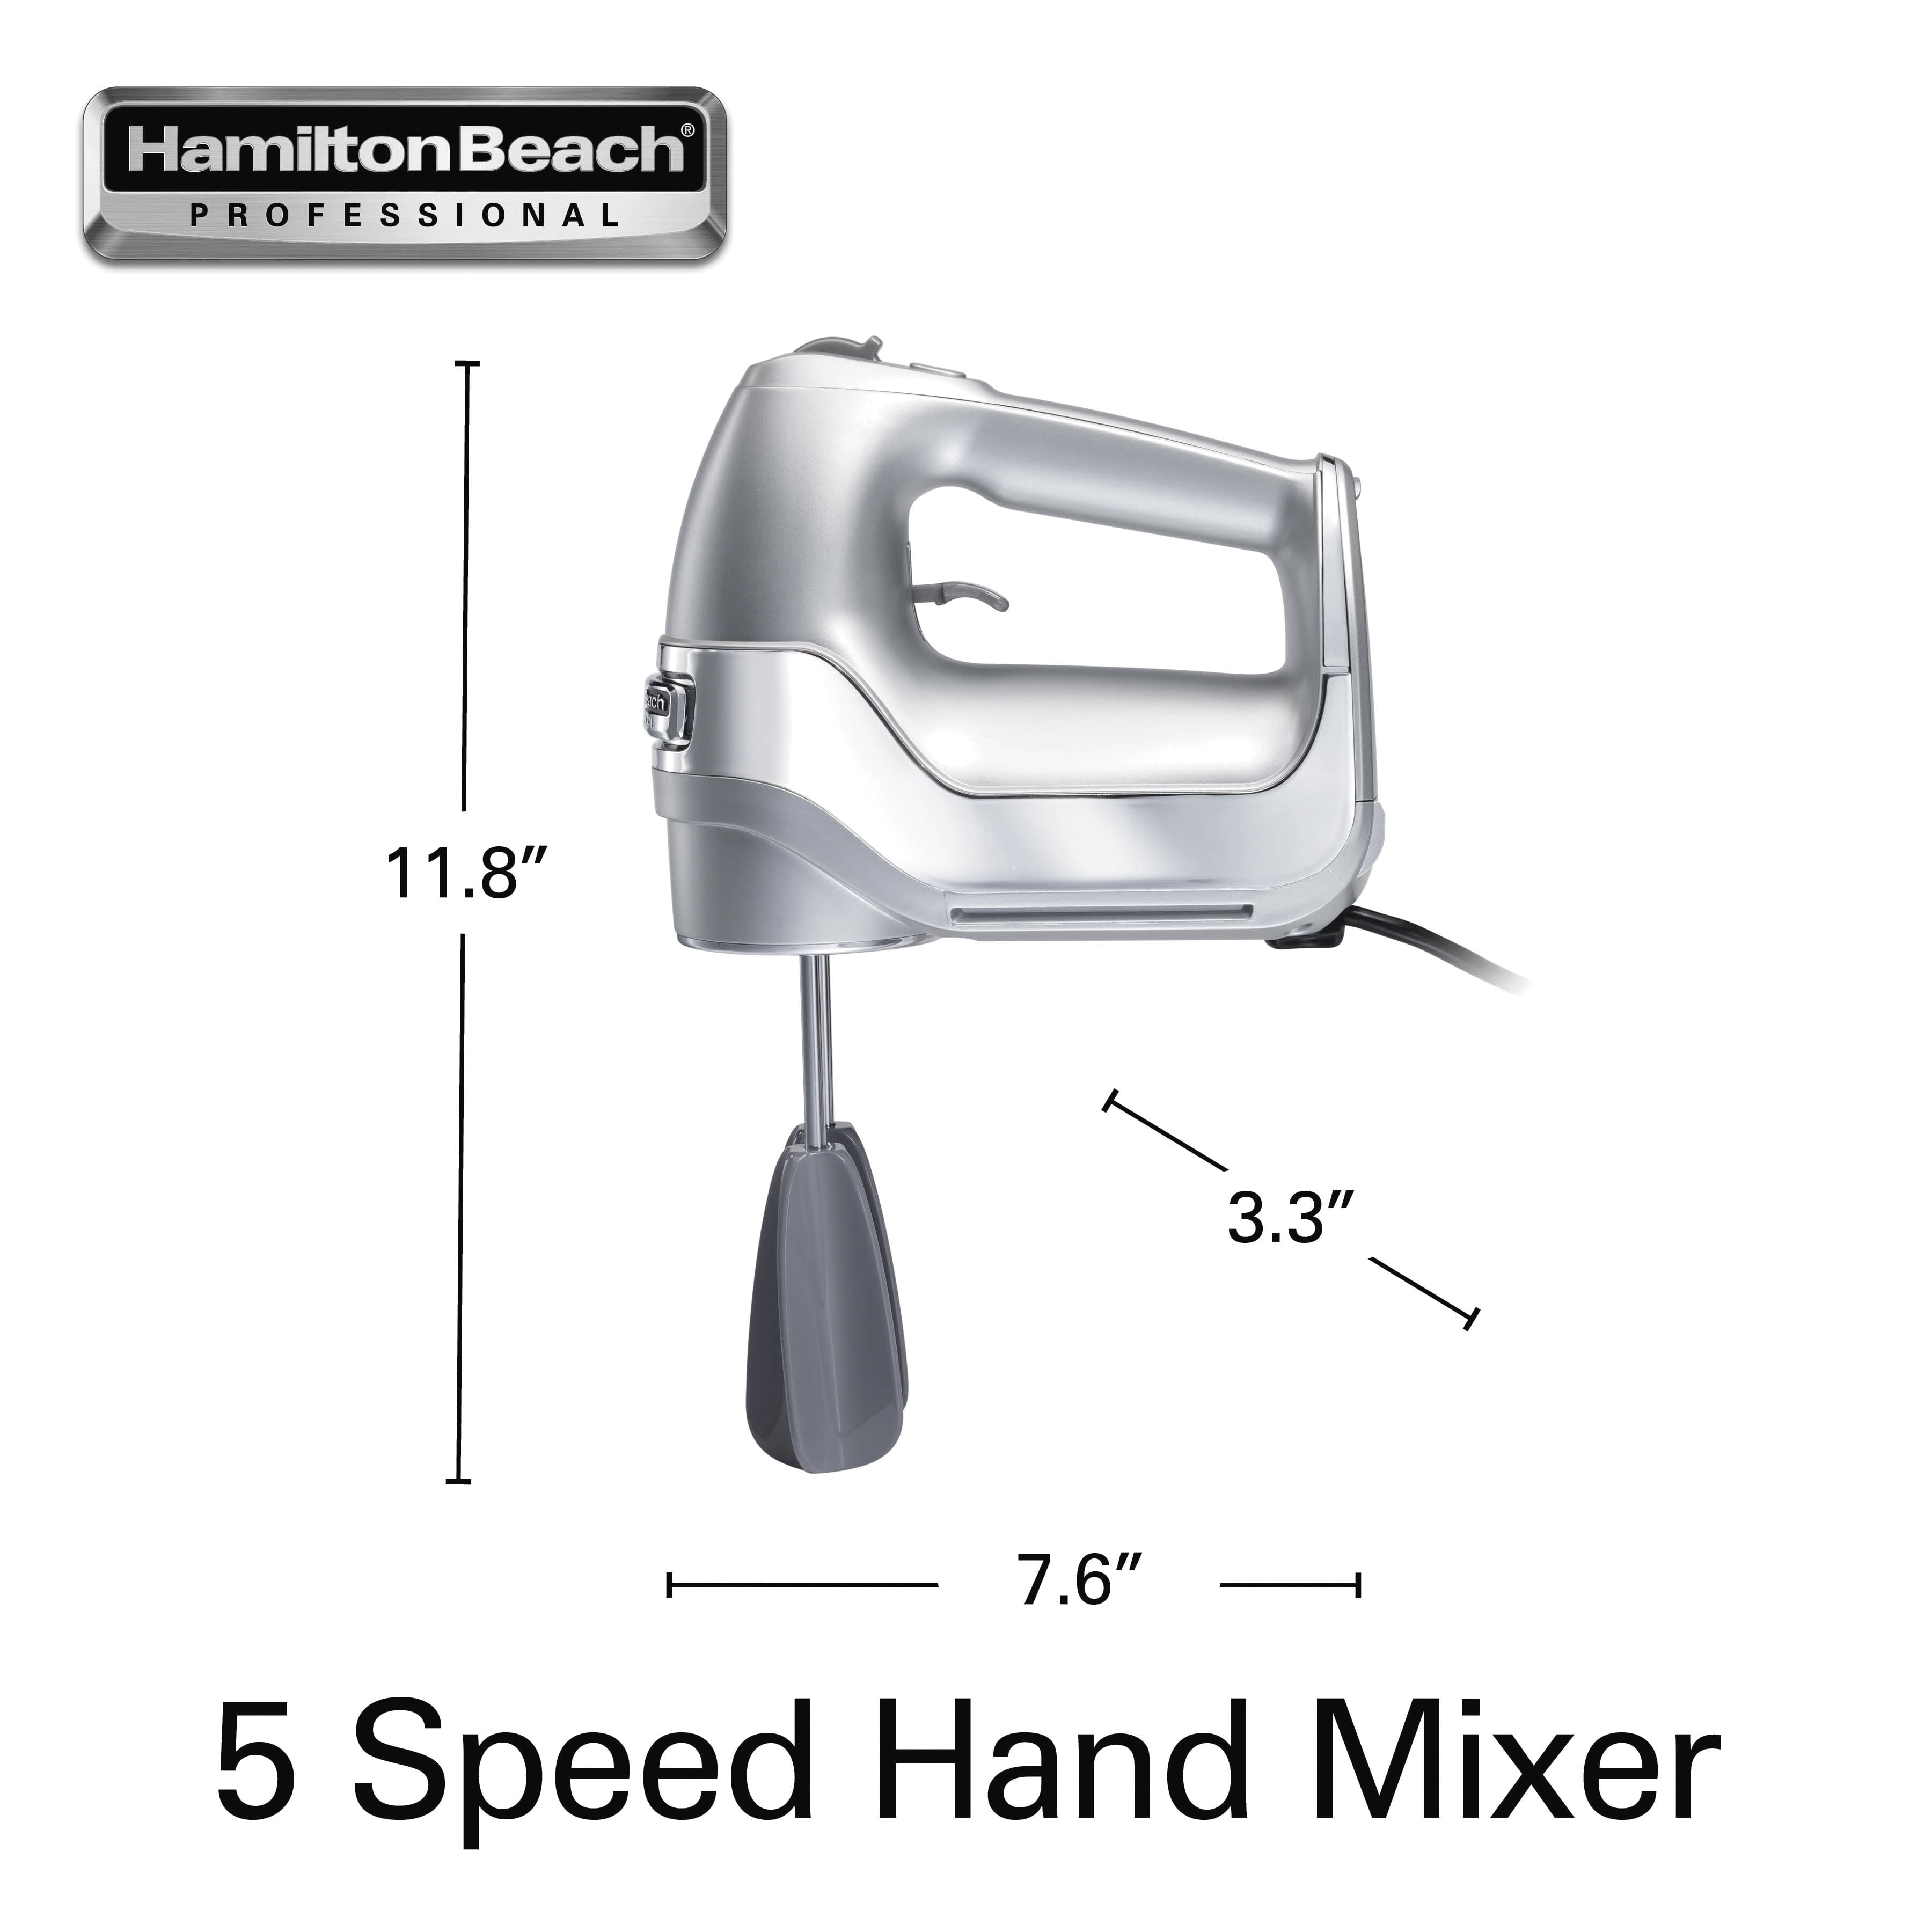  Hamilton Beach Magnolia Bakery 5-Speed Electric Hand Mixer,Powerful  1.3 Amp DC Motor for Effortless Mixing&Consistent Speed in Thick  Ingredients,Slow Start,Beaters and Whisk,Green(62601): Home & Kitchen